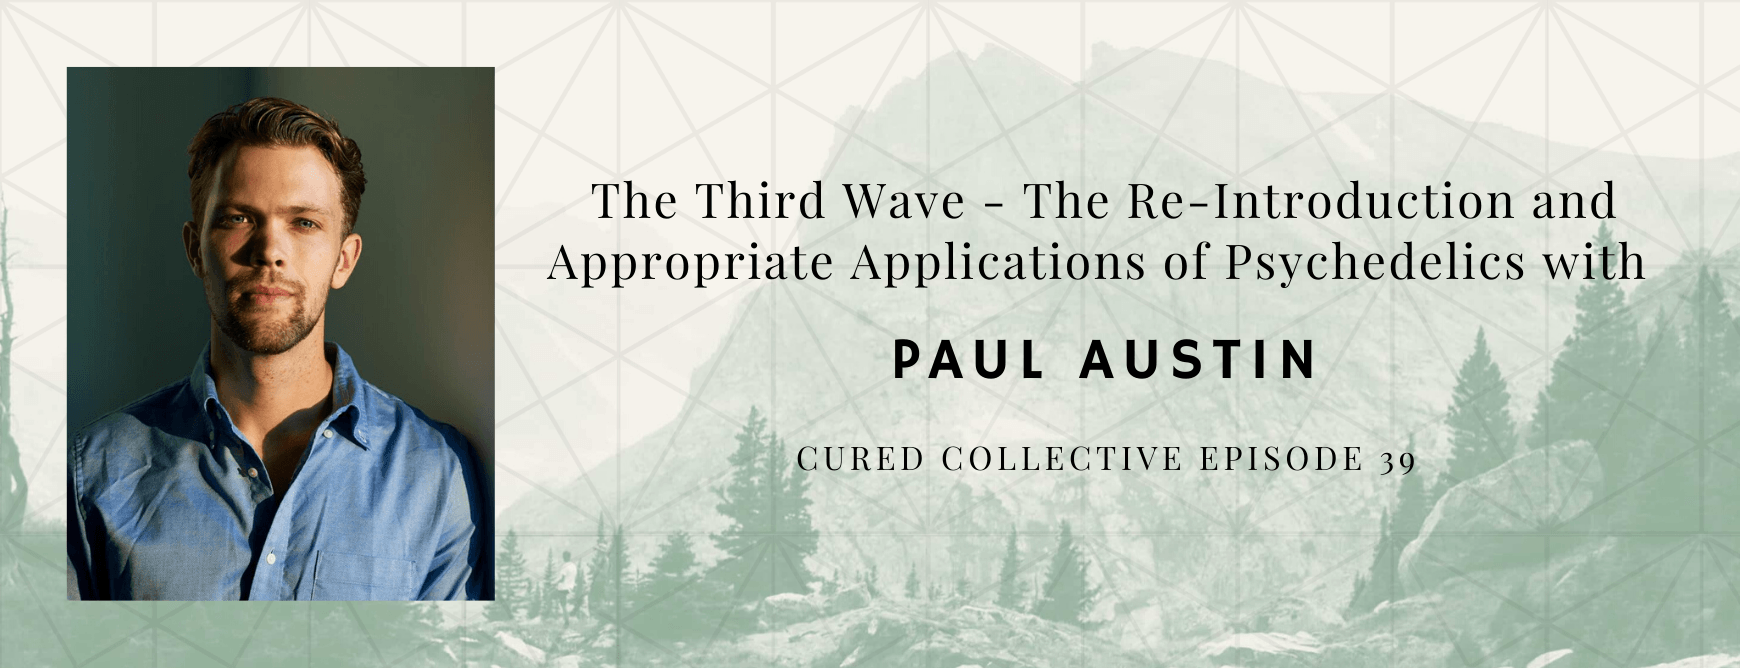 Cured Collective CBD Podcast with Paul Austin